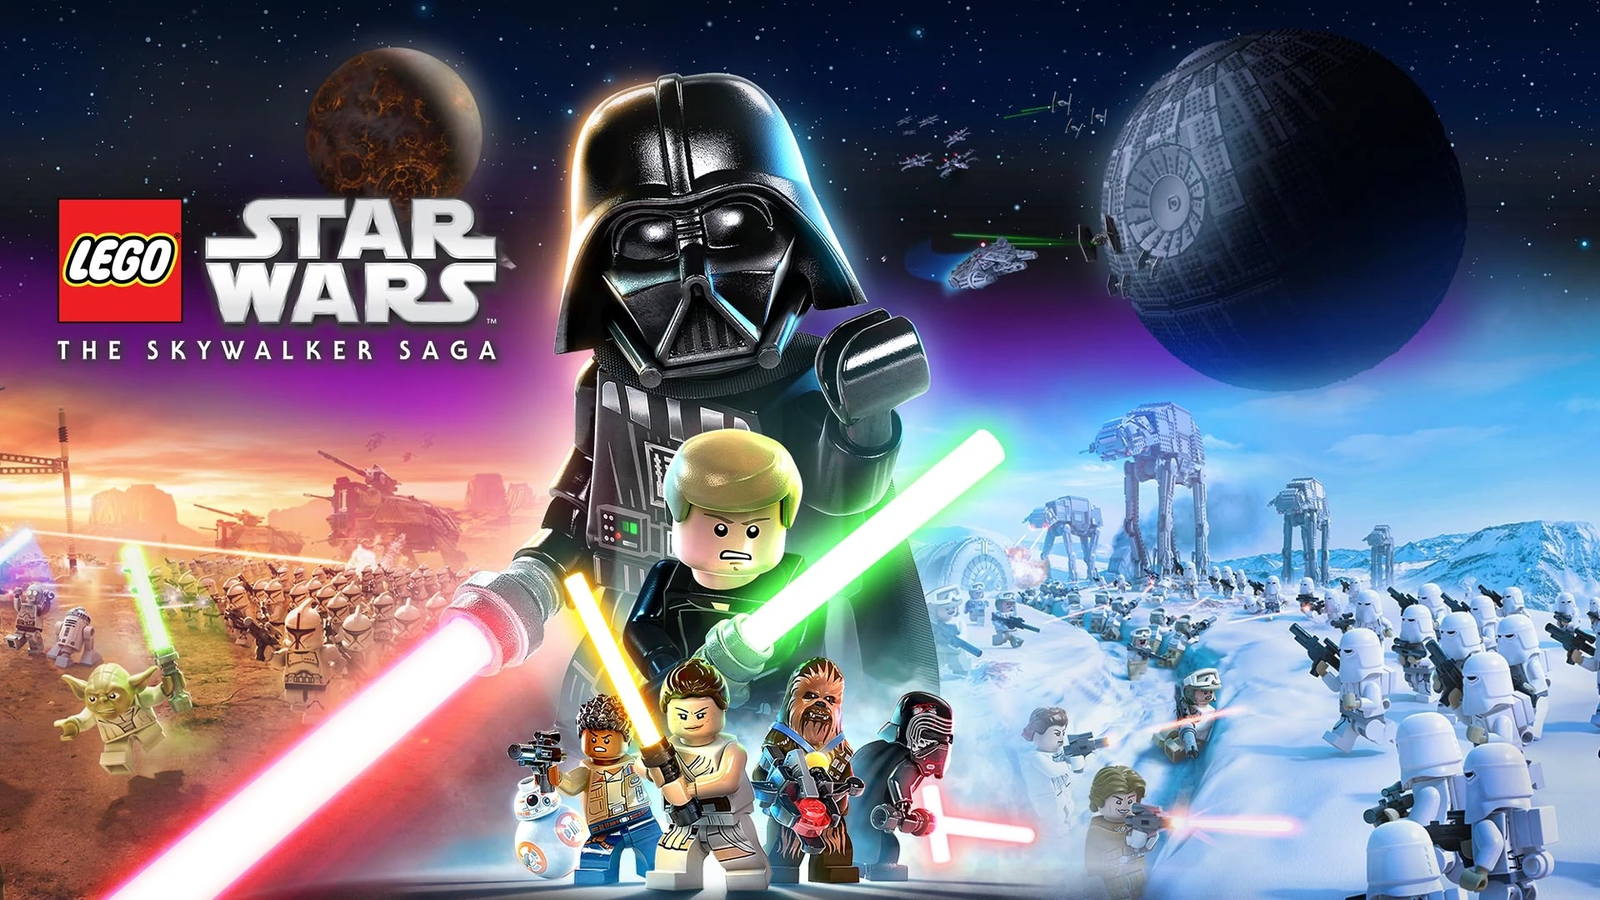 Lego Star Wars: The Skywalker Saga gets 30 more characters this